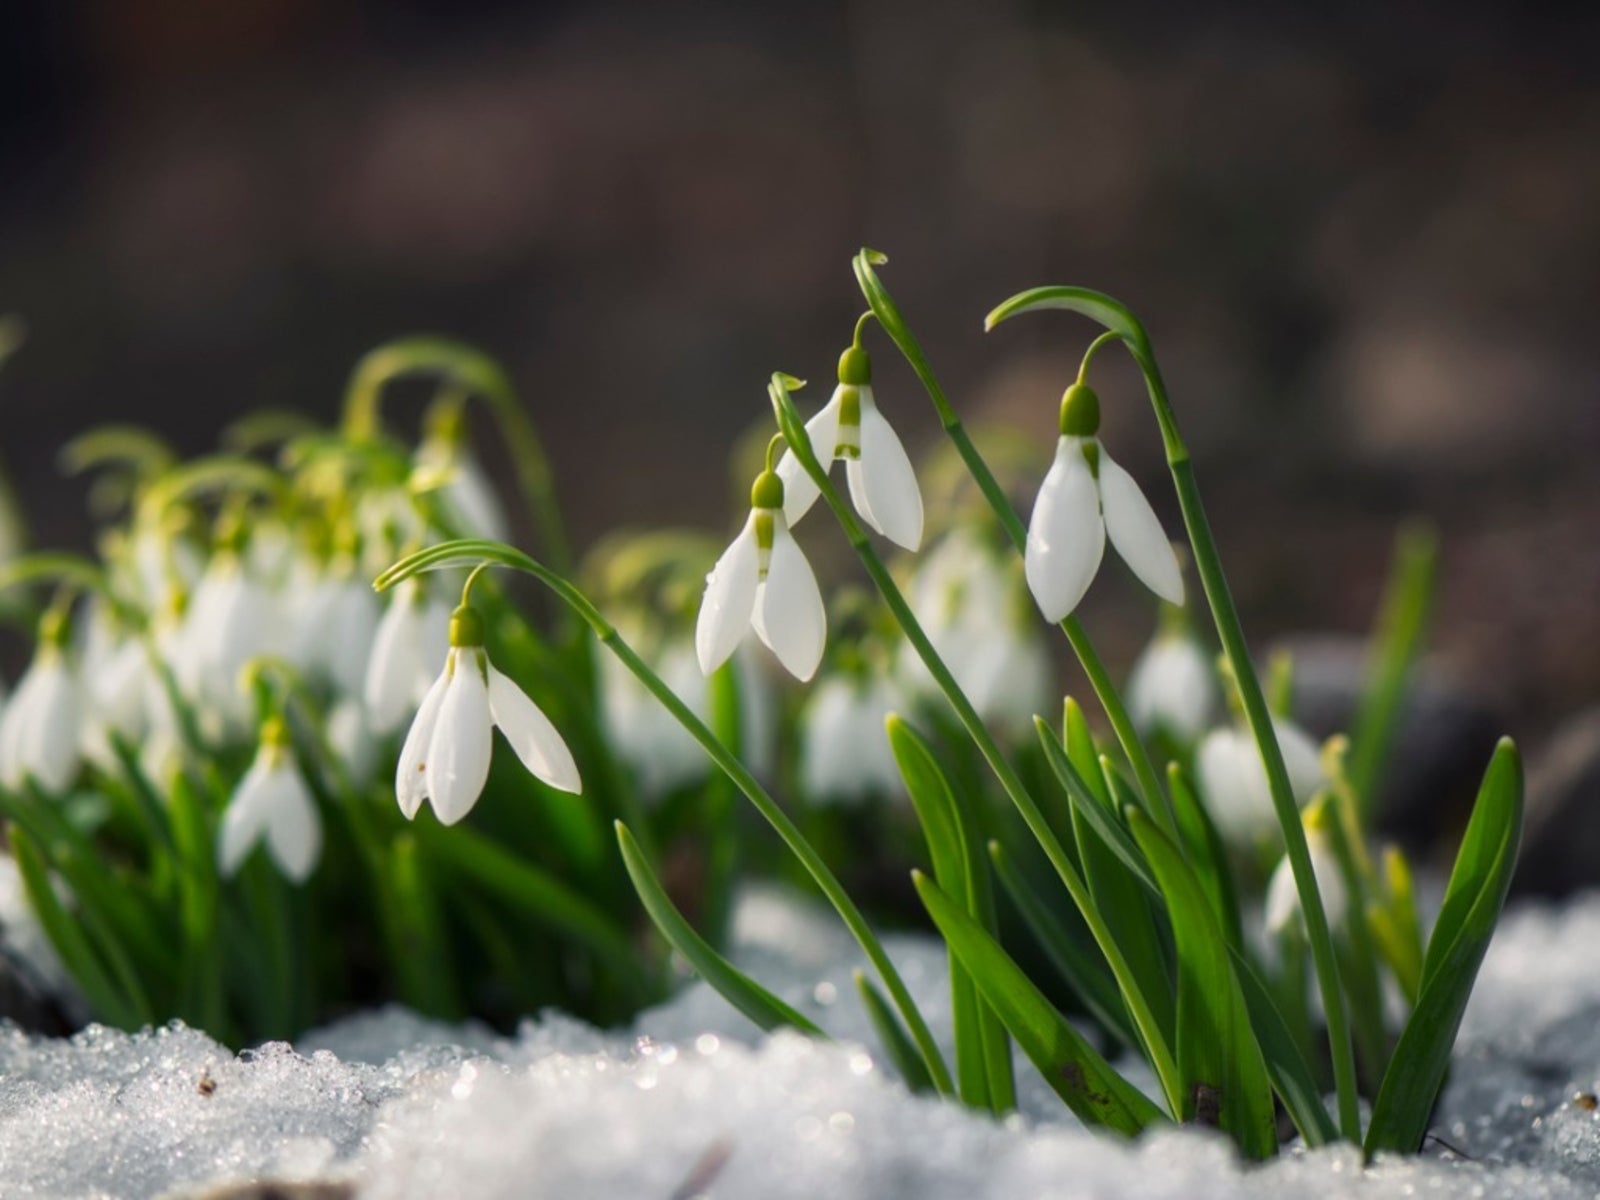 snowdrop flowers - how to plant and care for snowdrops